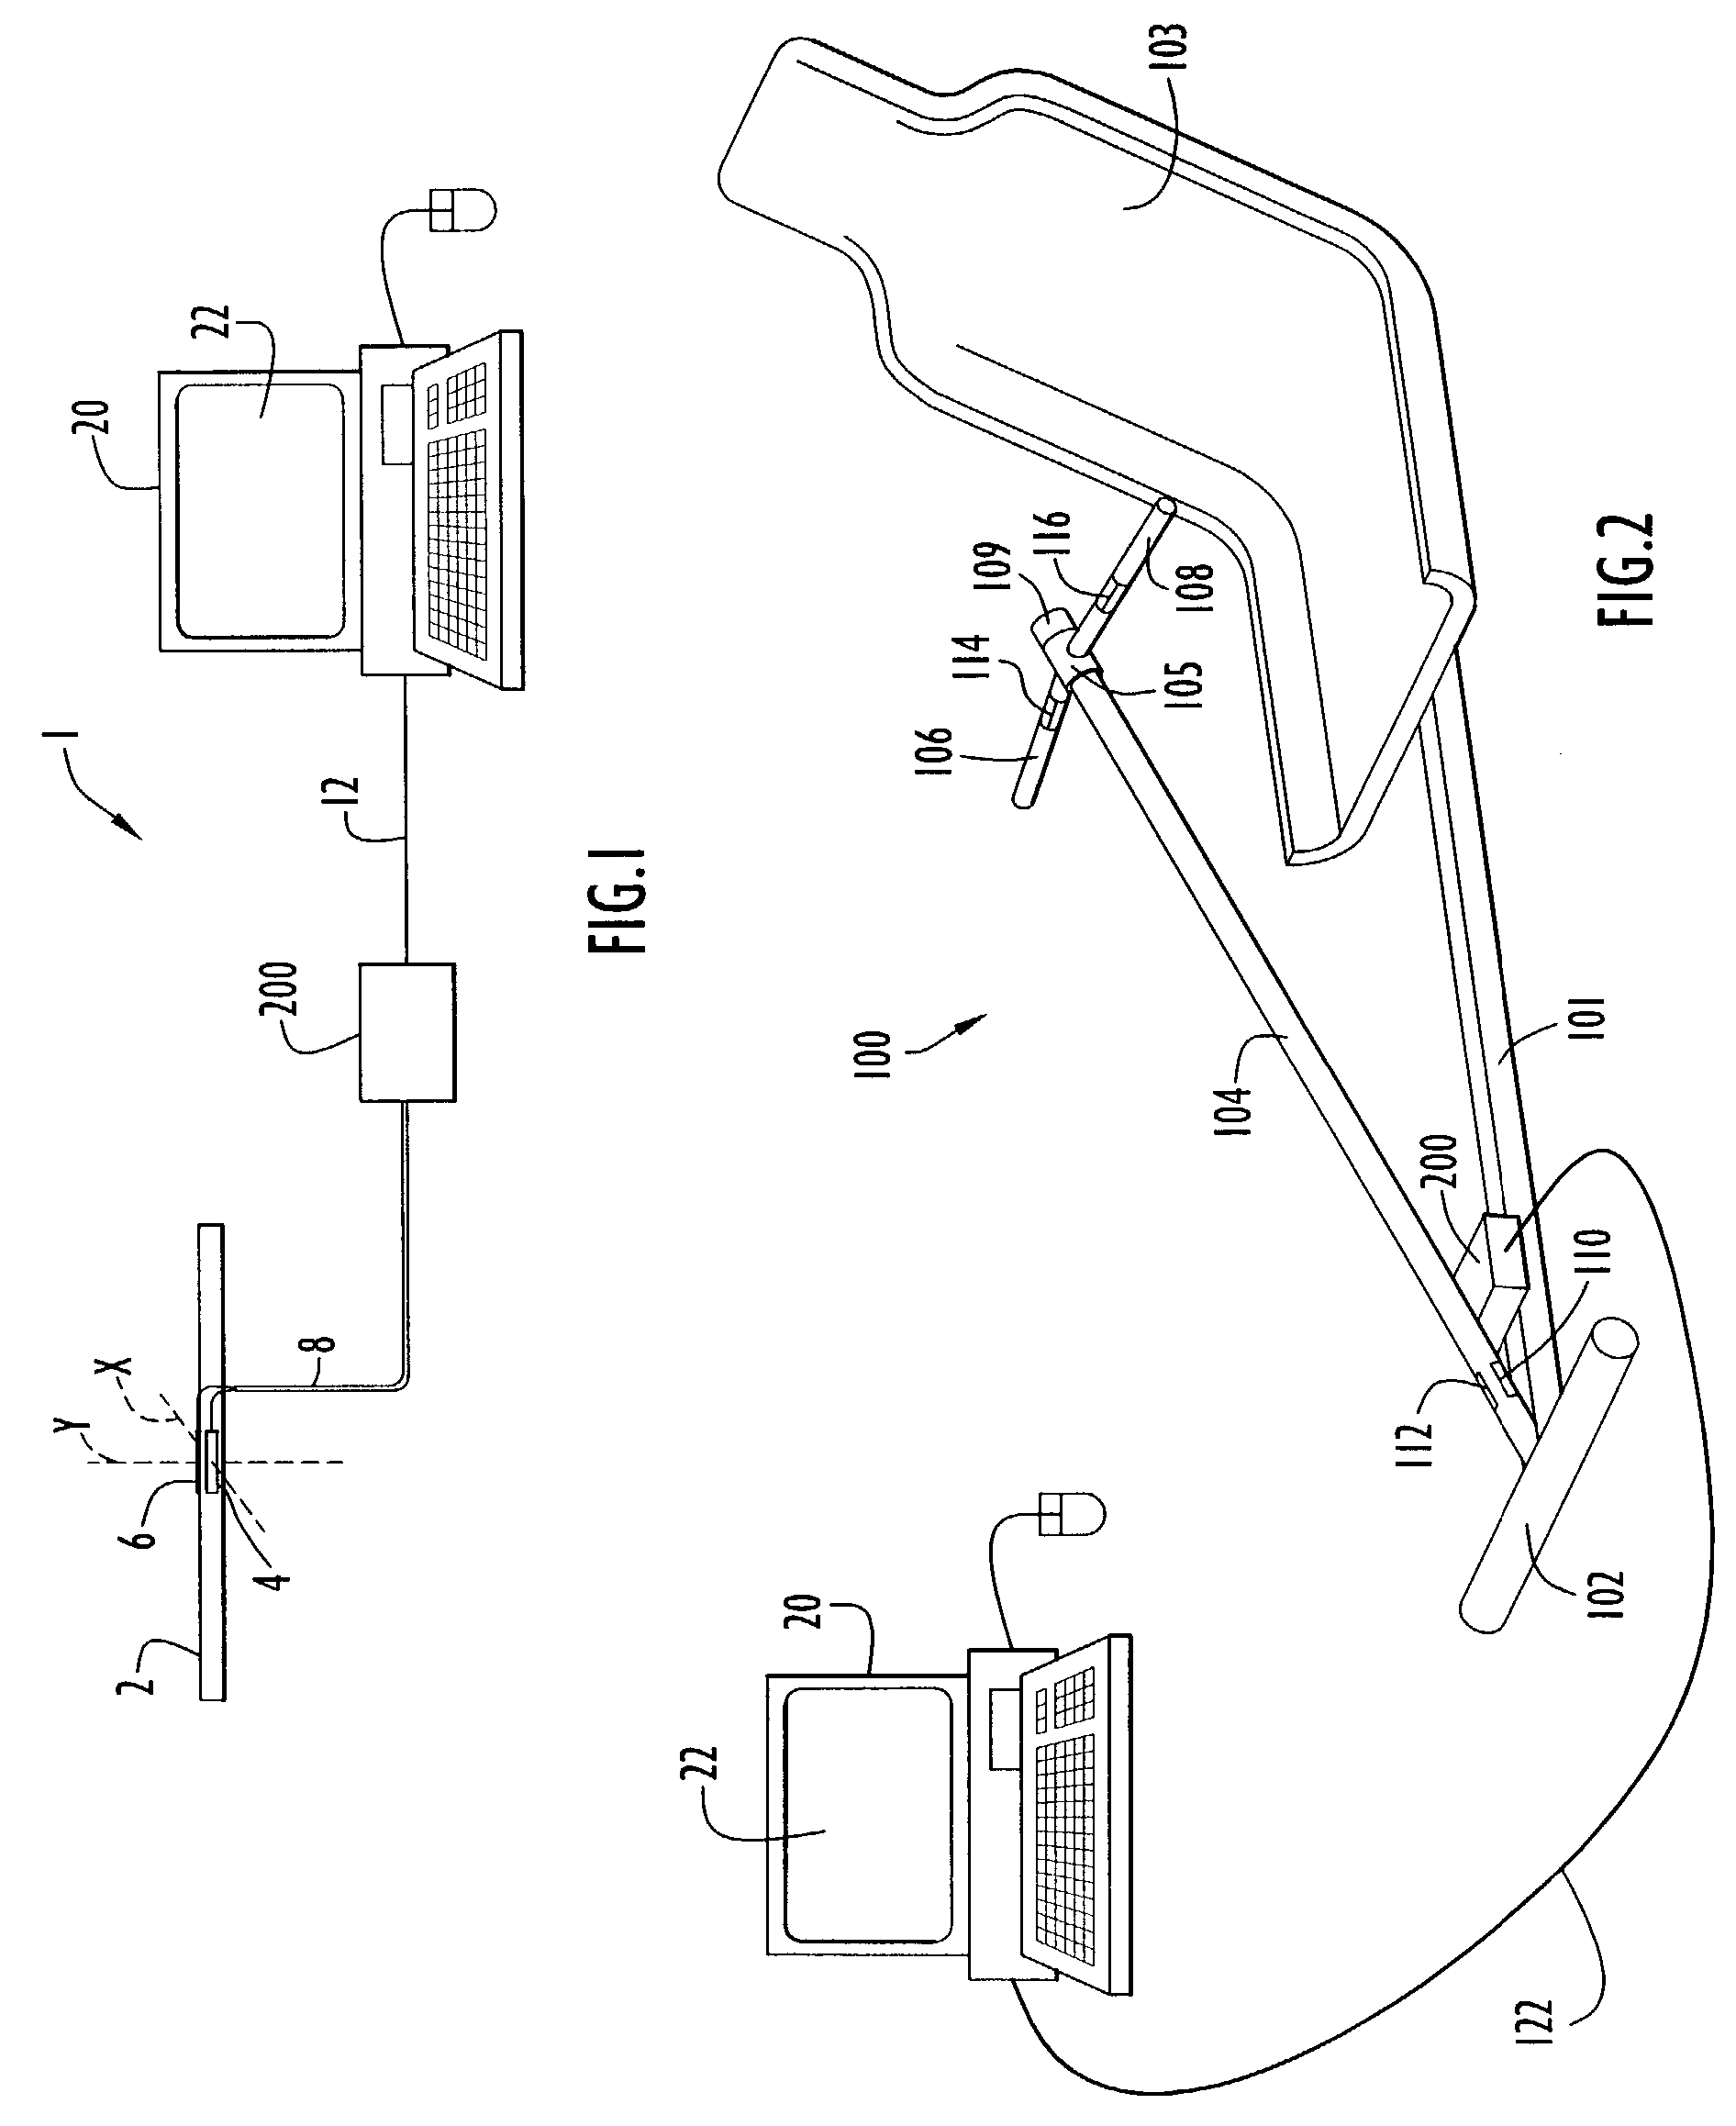 Computer interactive isometric exercise system and method for operatively interconnecting the exercise system to a computer system for use as a peripheral